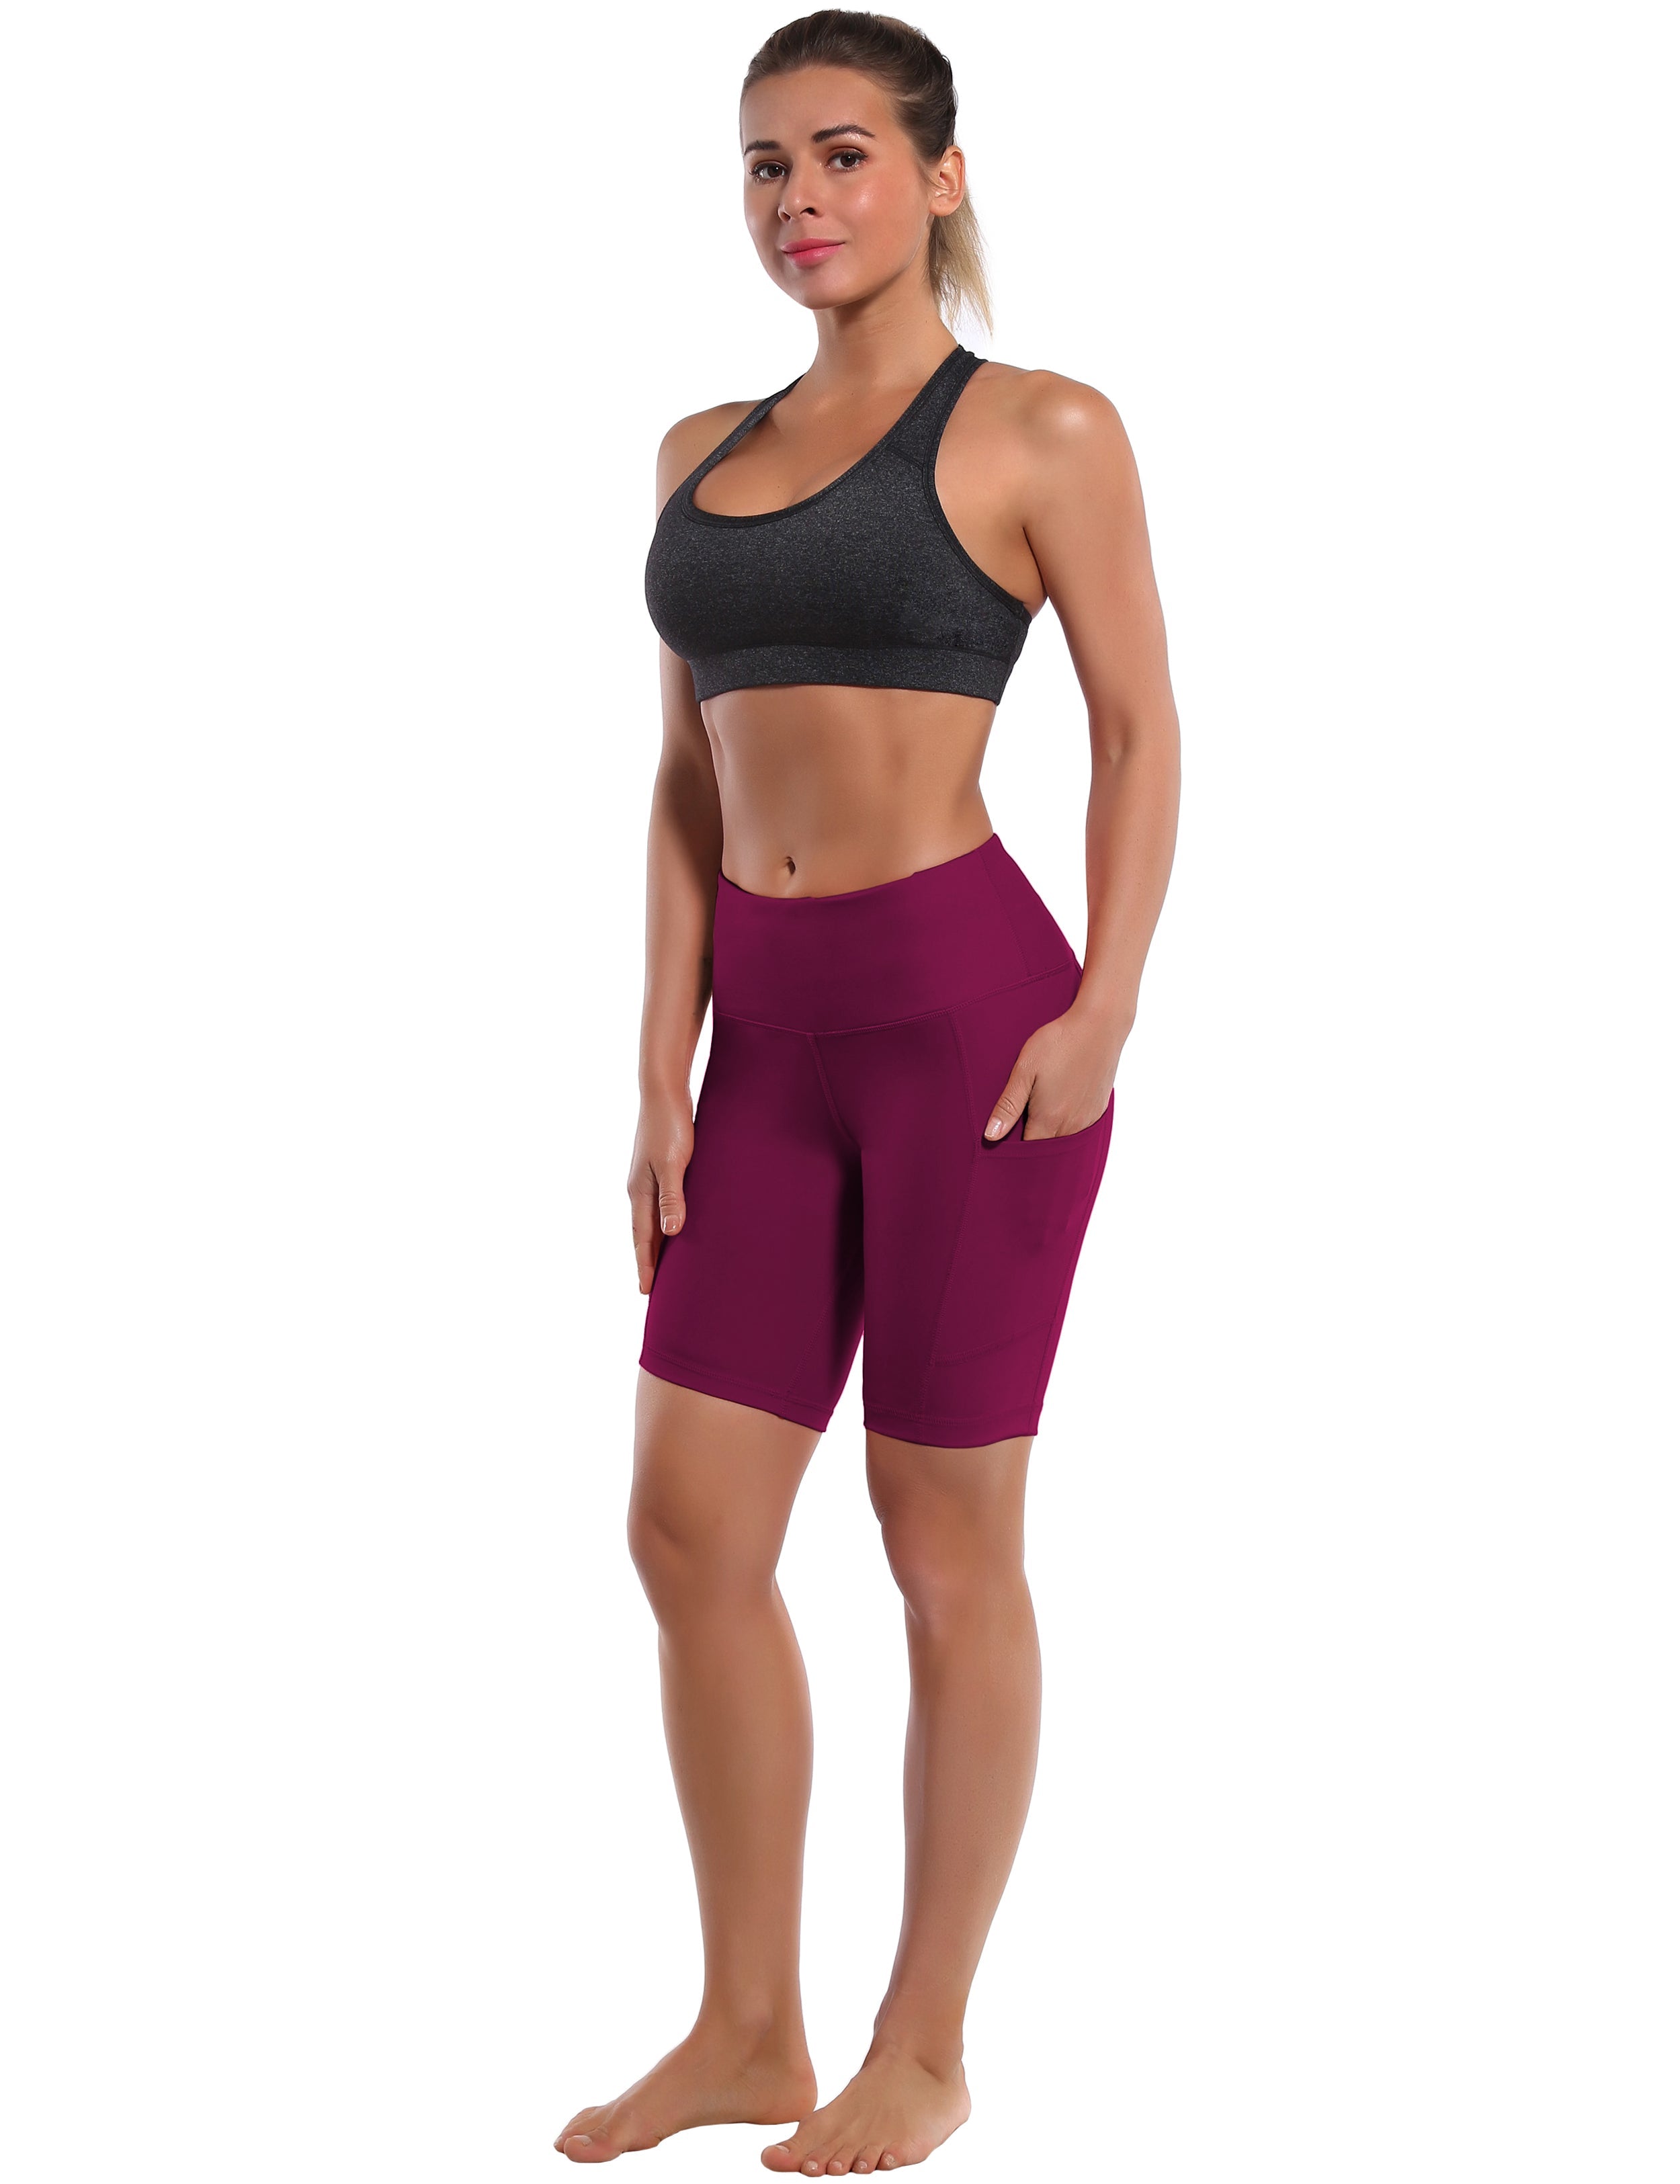 8" Side Pockets Golf Shorts grapevine Sleek, soft, smooth and totally comfortable: our newest style is here. Softest-ever fabric High elasticity High density 4-way stretch Fabric doesn't attract lint easily No see-through Moisture-wicking Machine wash 75% Nylon, 25% Spandex